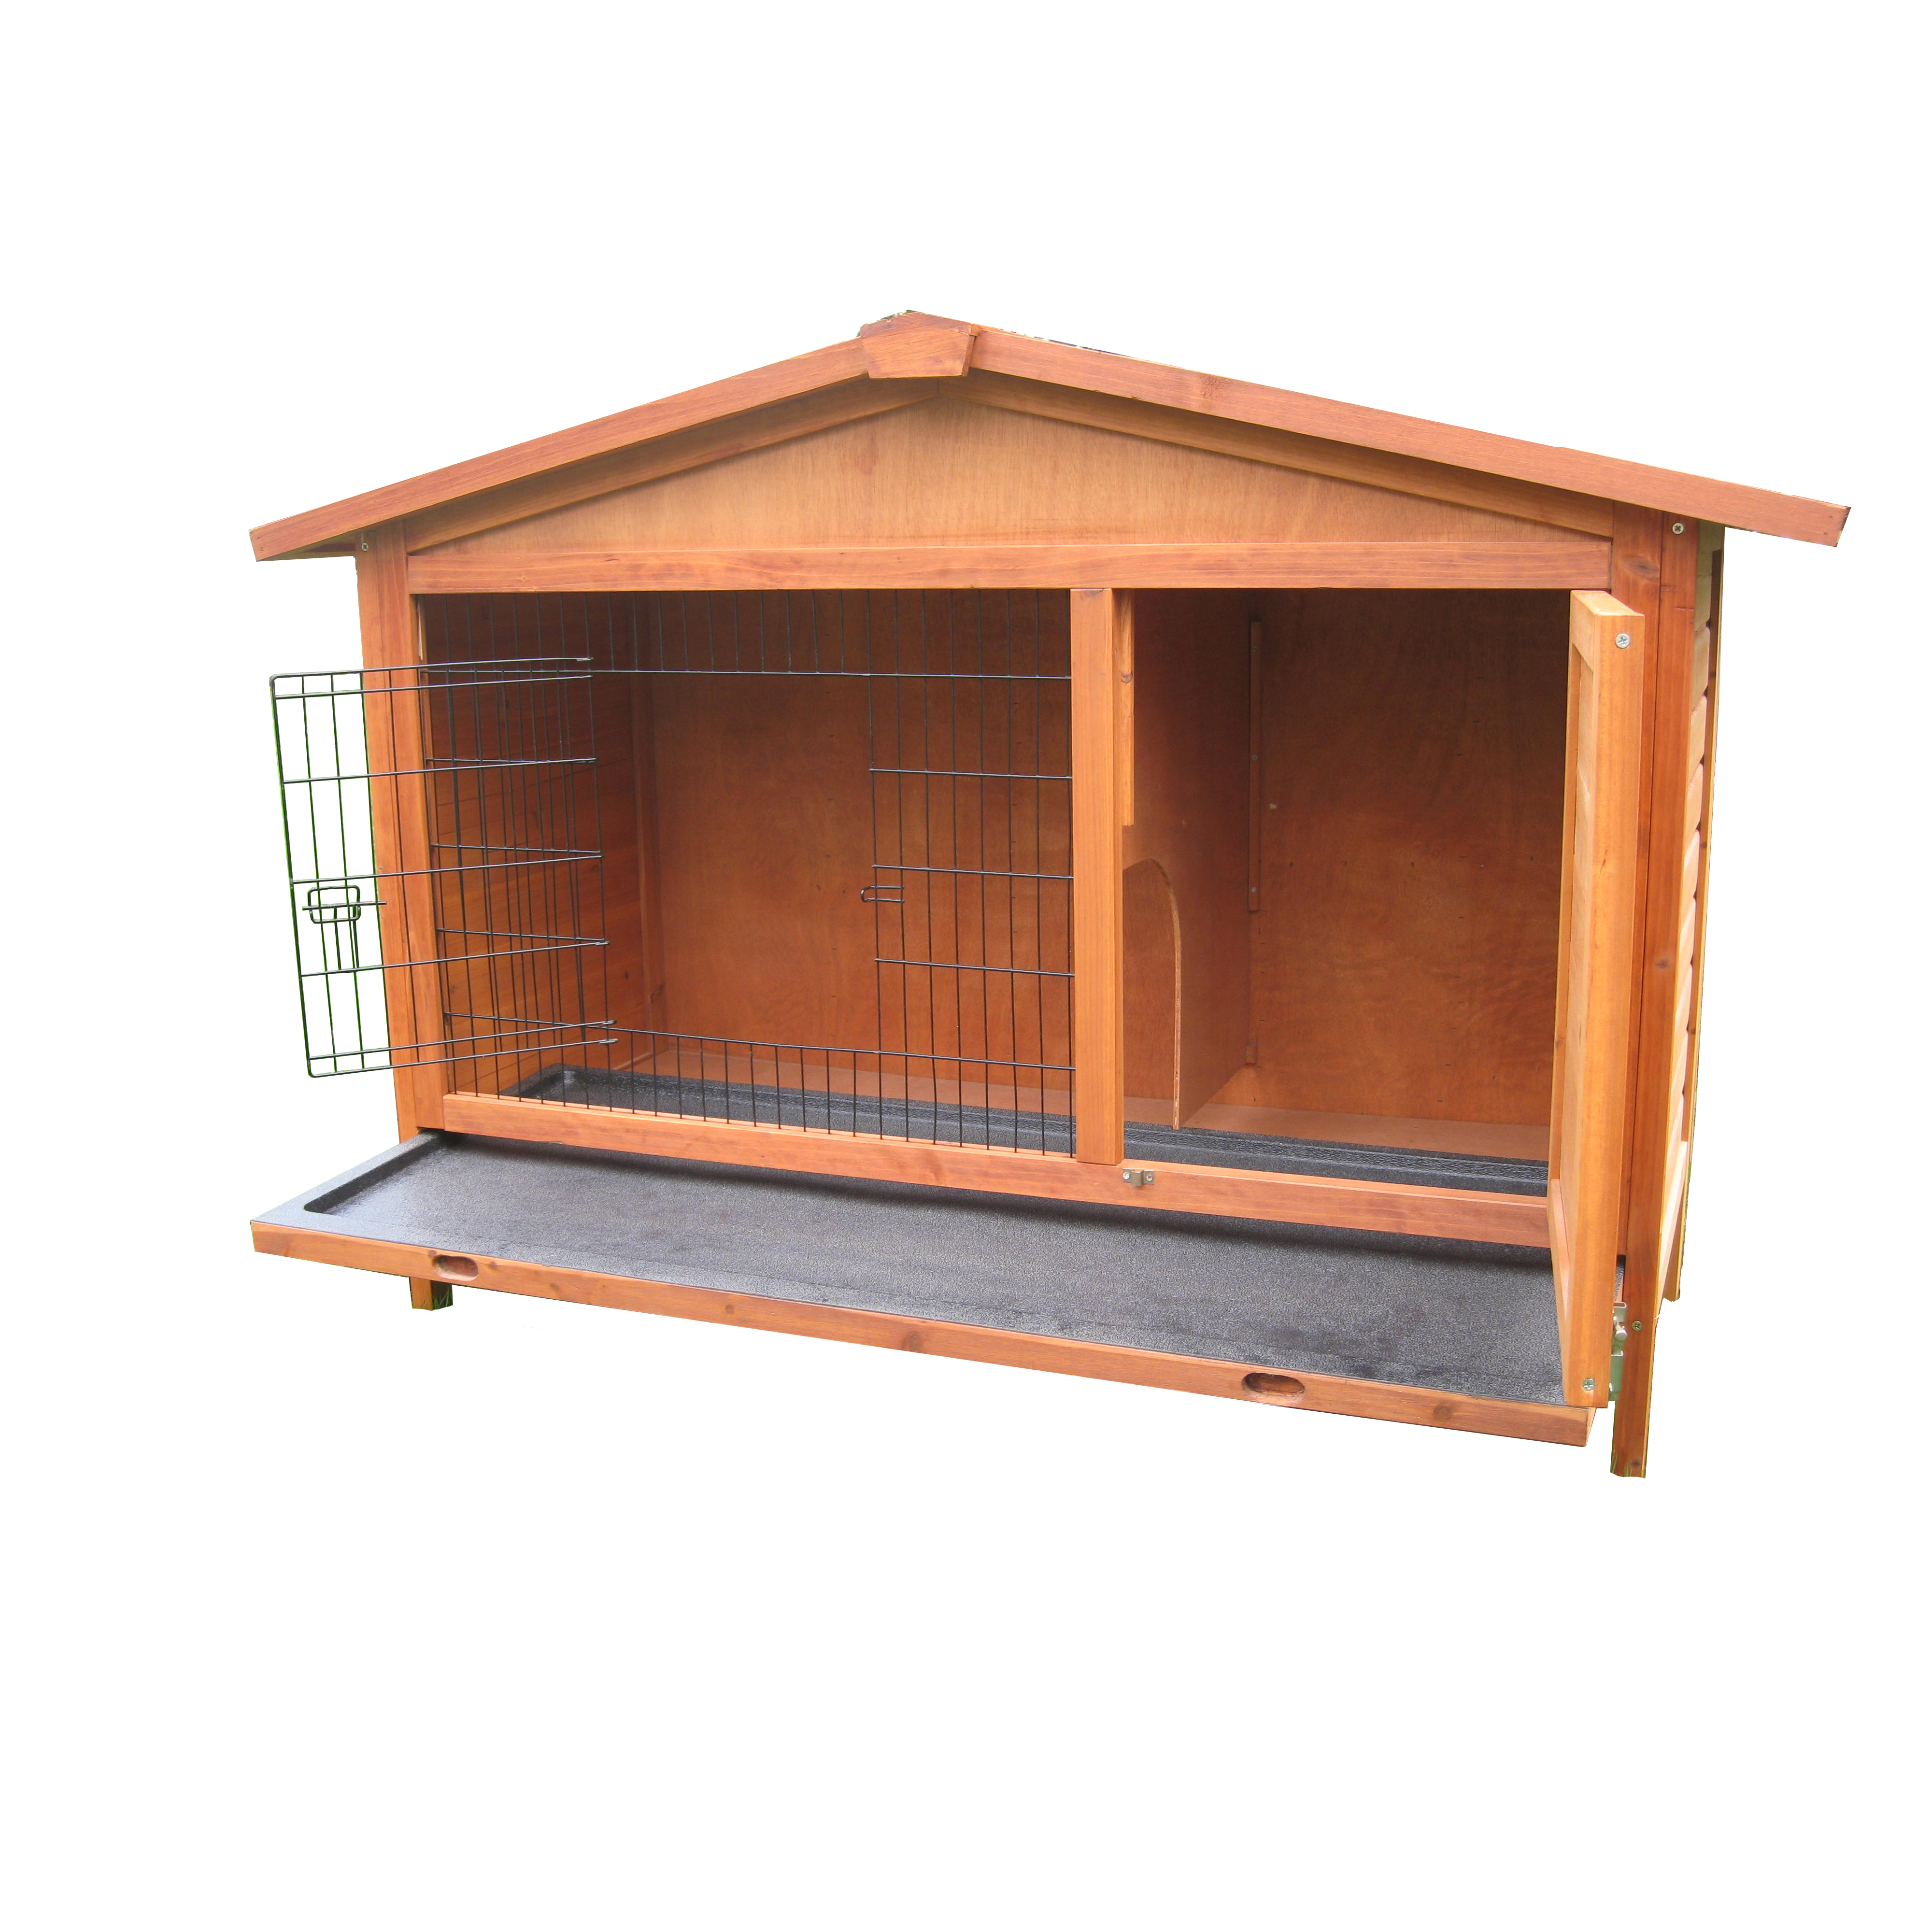 fir wood easy assembled eco friendly outdoor Wooden Metal Floor Wood Rabbit Cage bunny house Sale